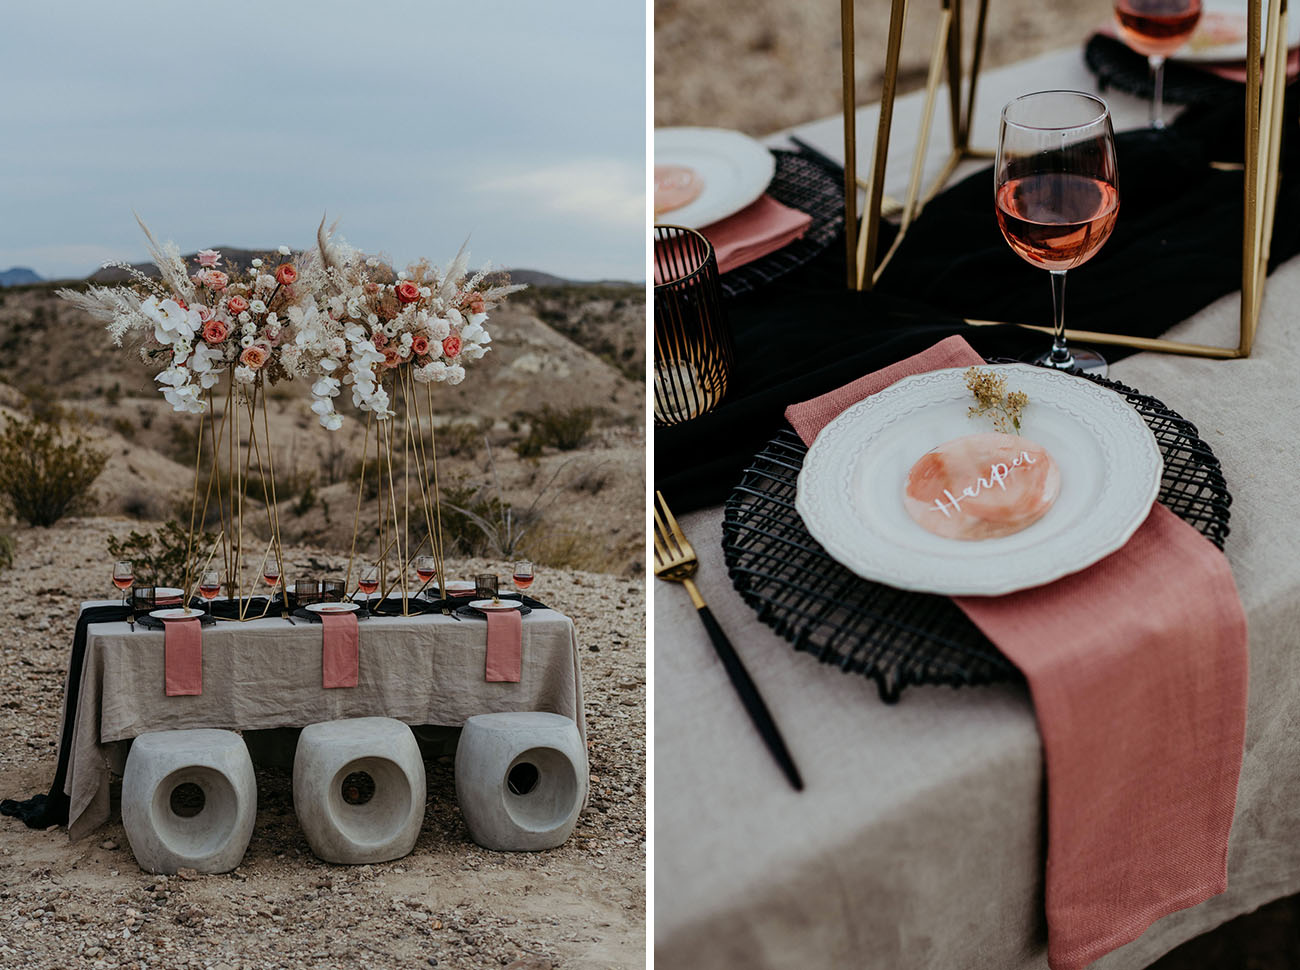 The table was laid with neutral, pink and black textiles, woven chargers and black cutlery